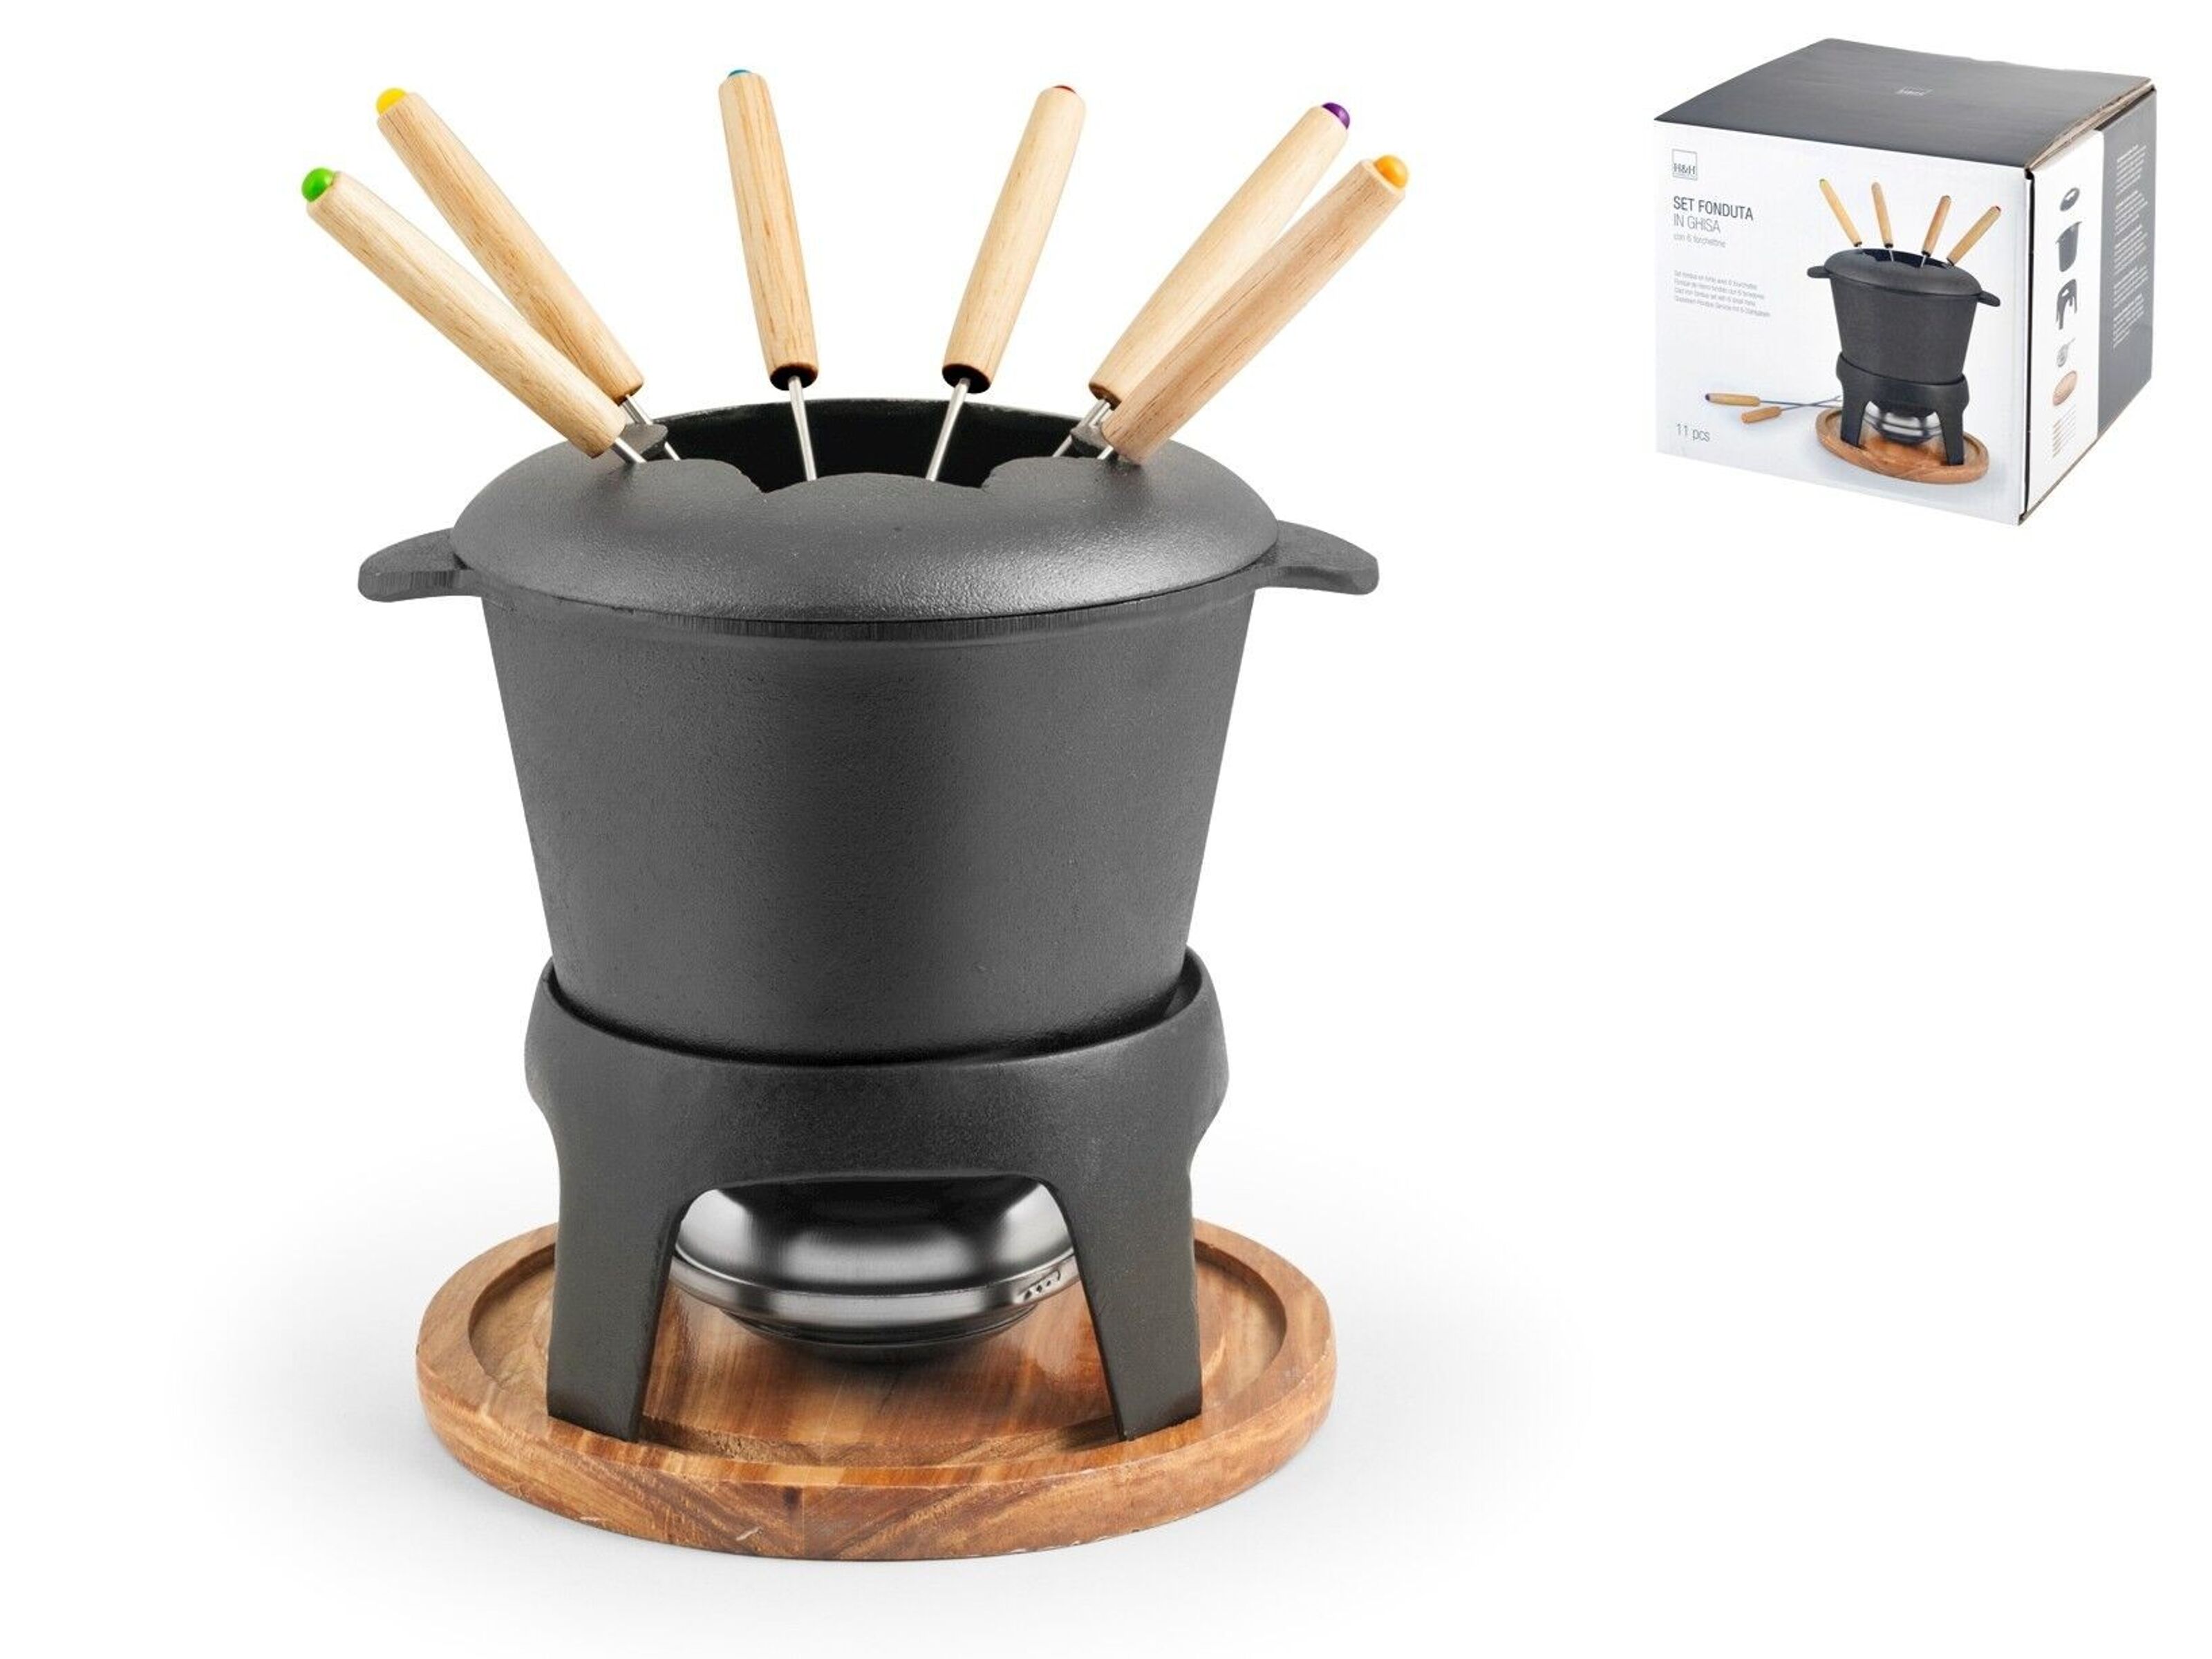 11-piece handle; iron wooden with in stove; with iron stainless cm fondue set 1 fuel h wooden steel 21x16x10 6 Buy cast Consisting 1 of: with wholesale base. cast saucepan paste forks